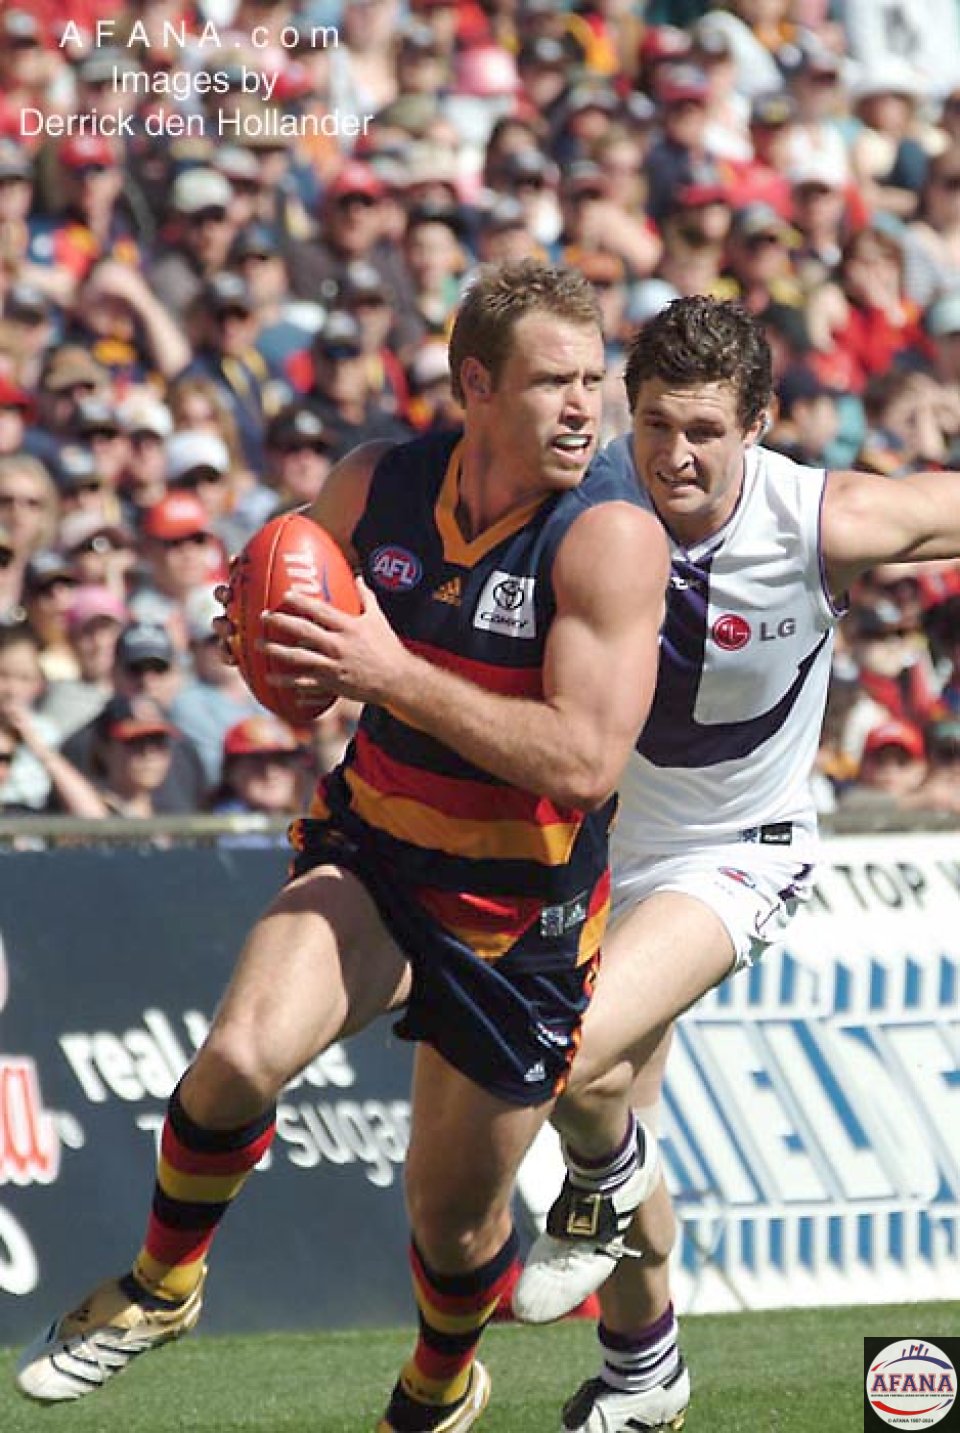 [b]Ben Hudson propells forward on the rebound from the Crows defence[/b]